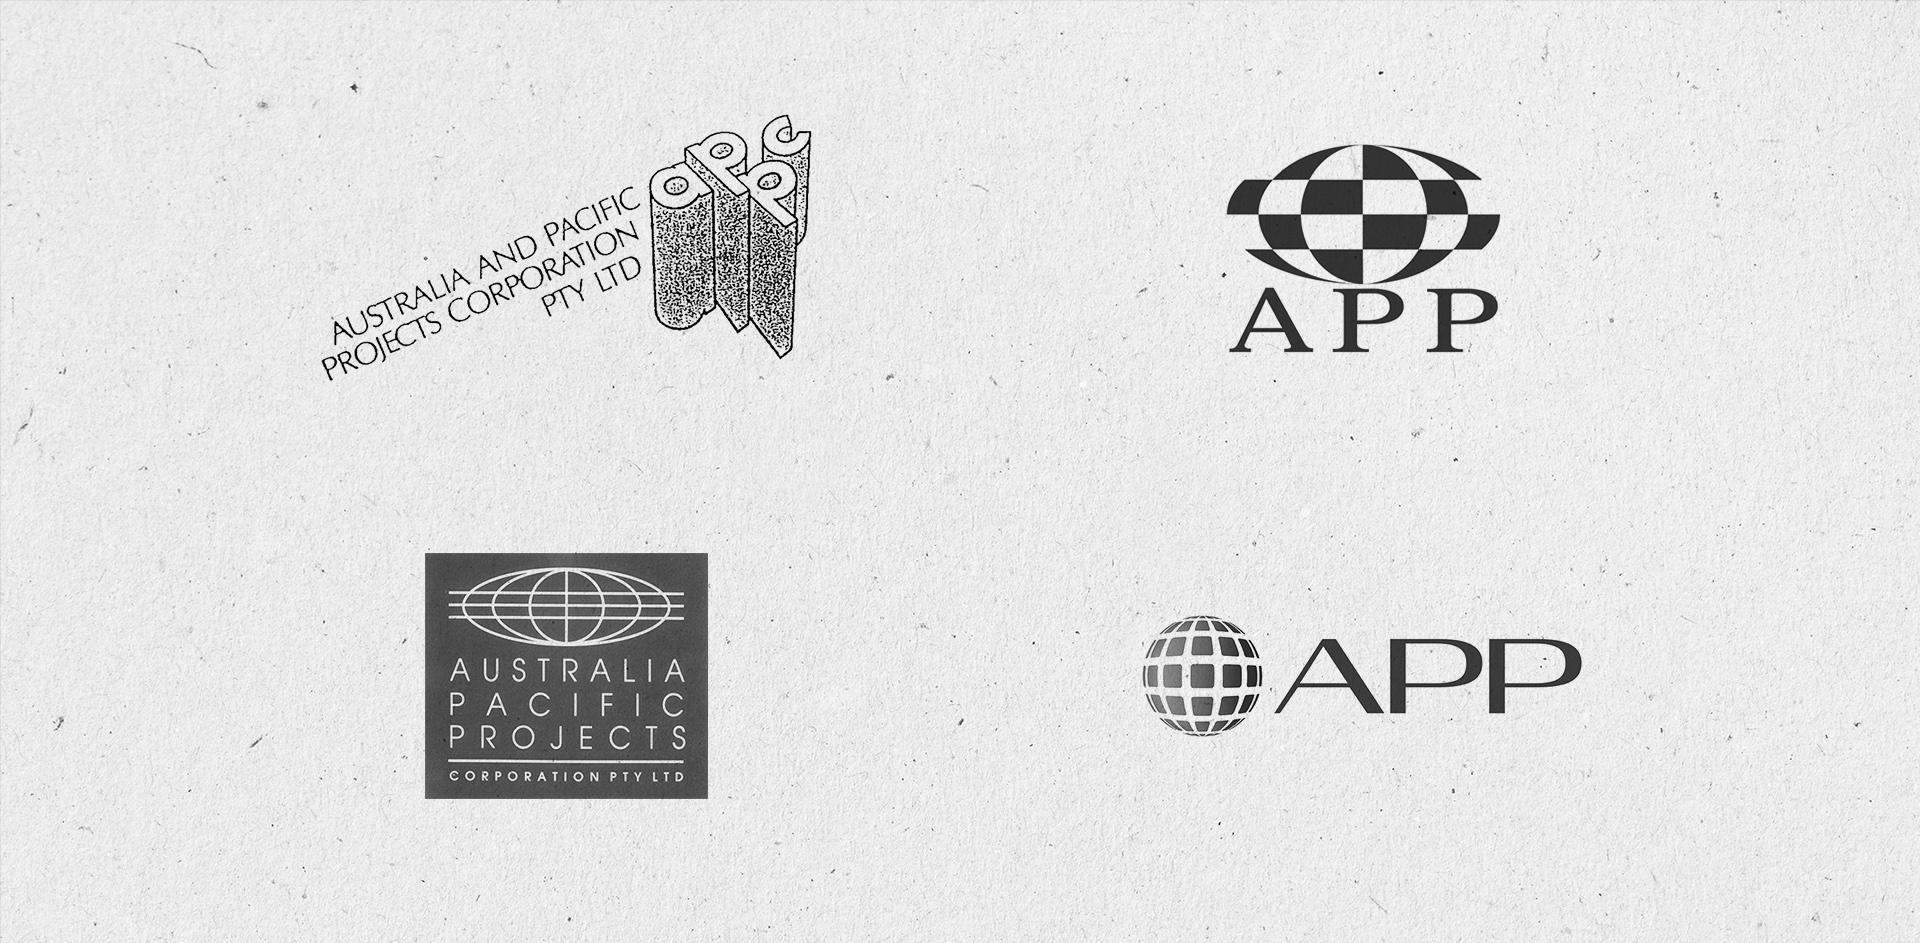 Set of business logos: APPC and APP